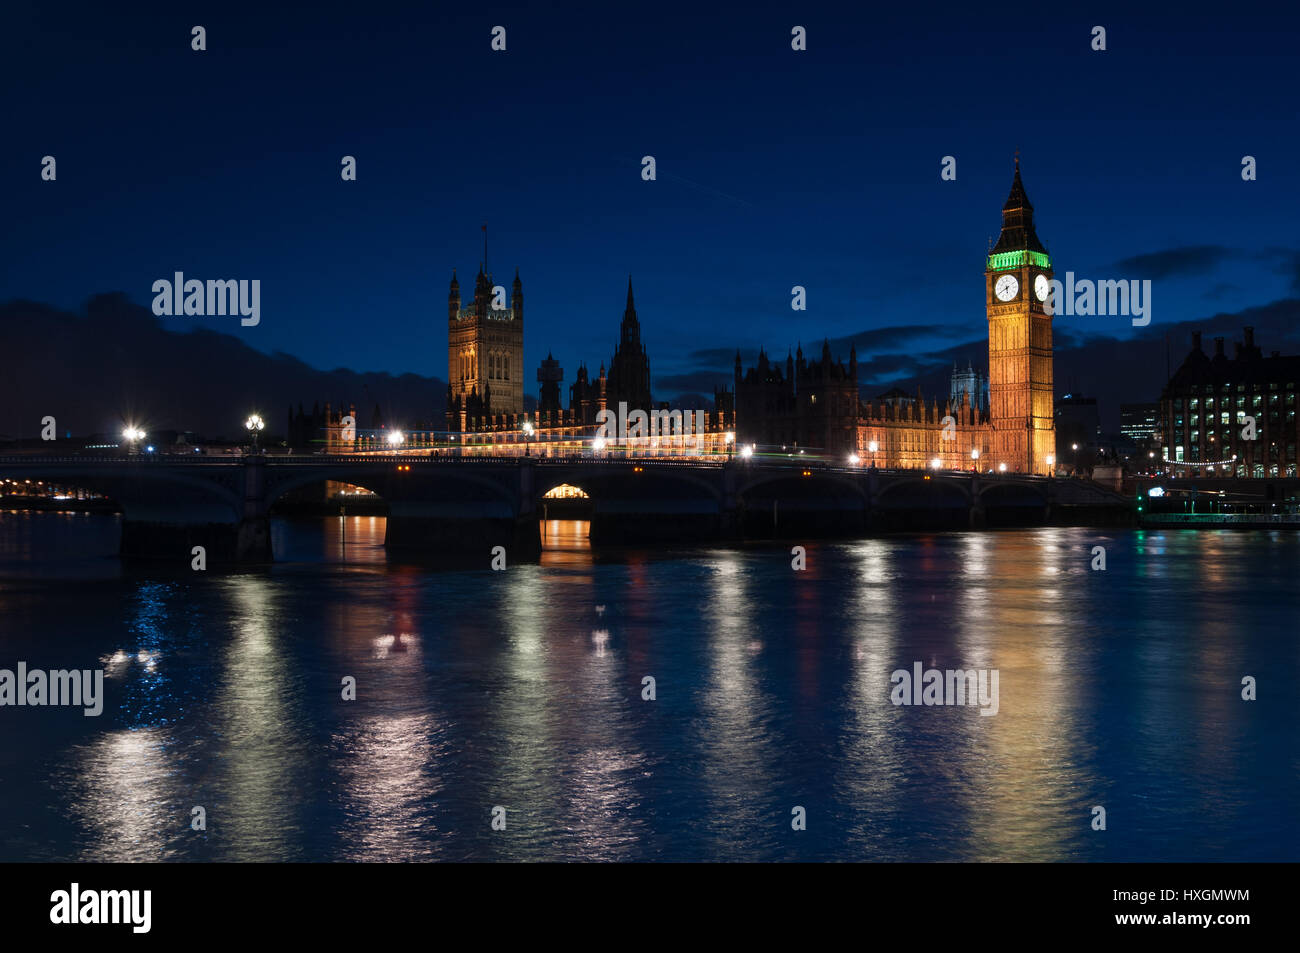 Palace of Westminster, Big Ben, Westminster bridge and the Thames river at dusk, London, United Kingdom Stock Photo